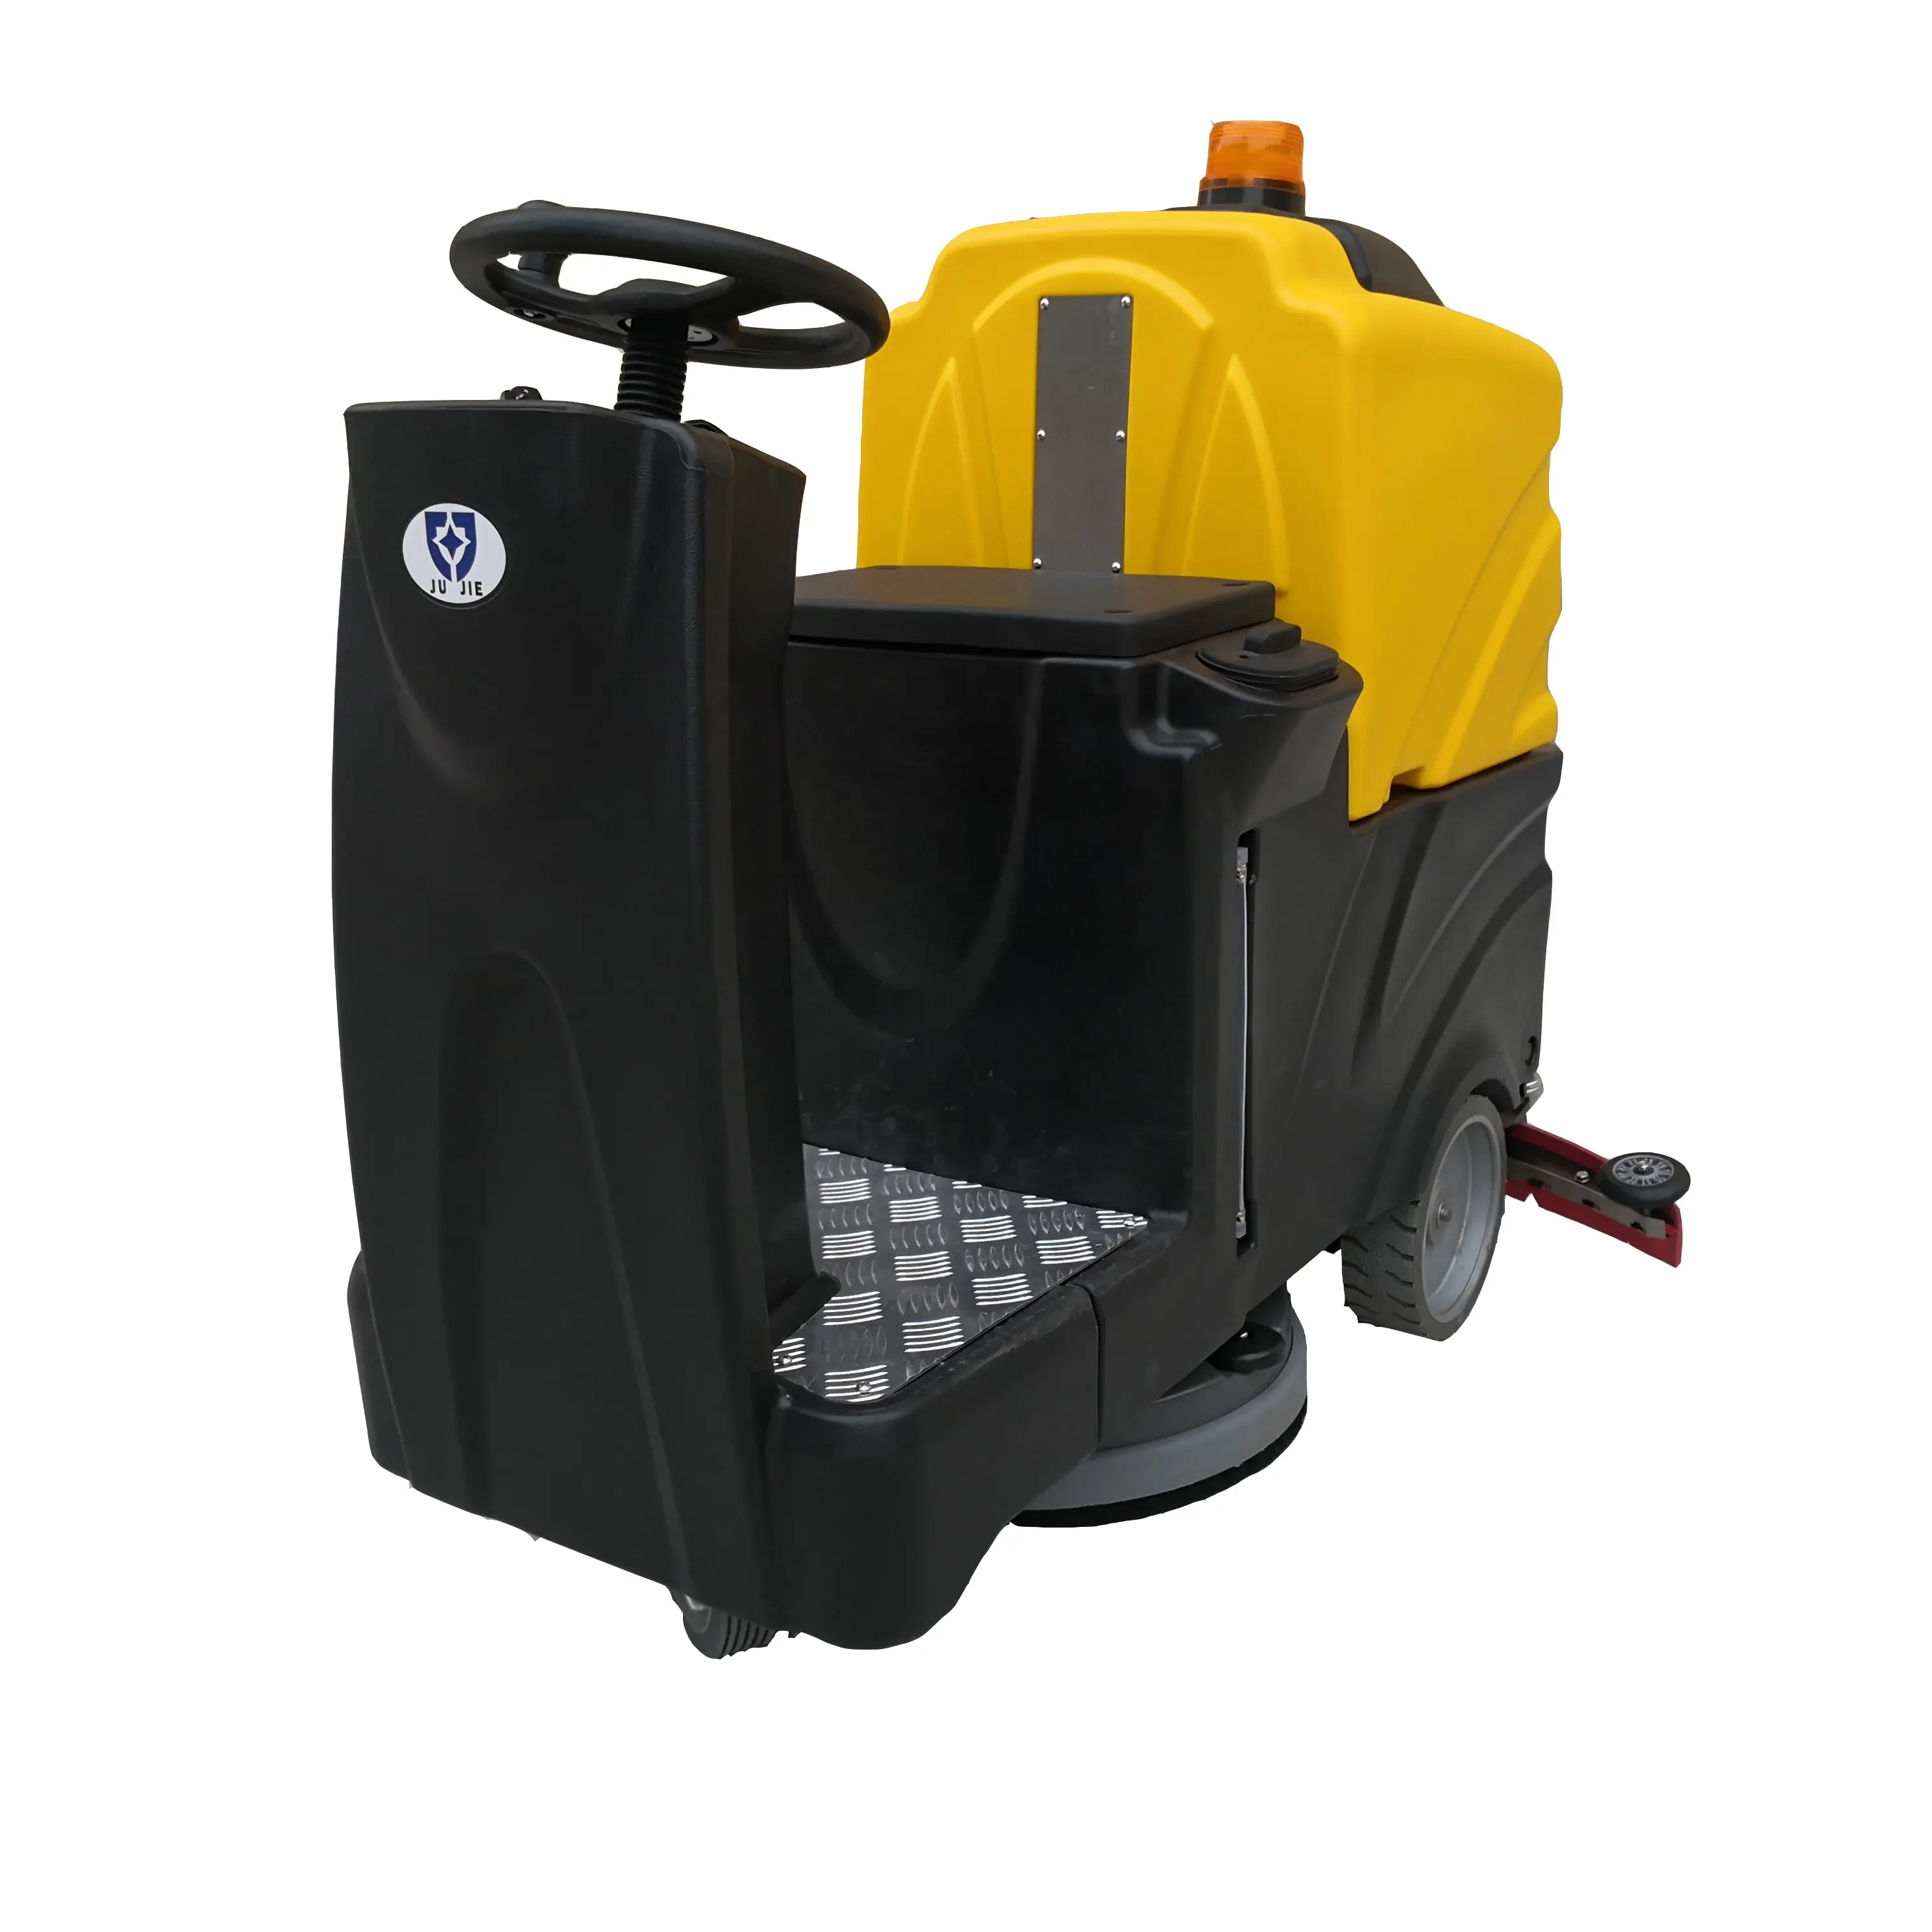 C6 floor scrubber for cleaning business industrial site ride on washer